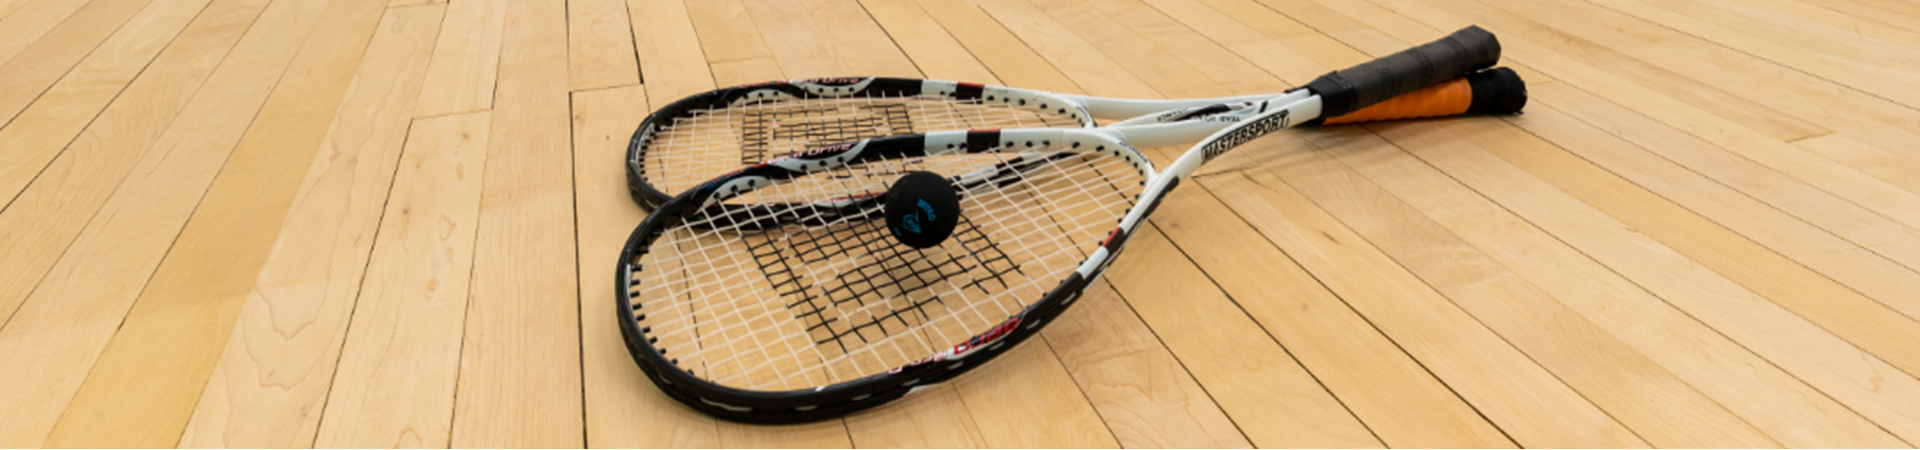 Squash rackets and ball on the floor of the squash court at One Leisure Huntingdon